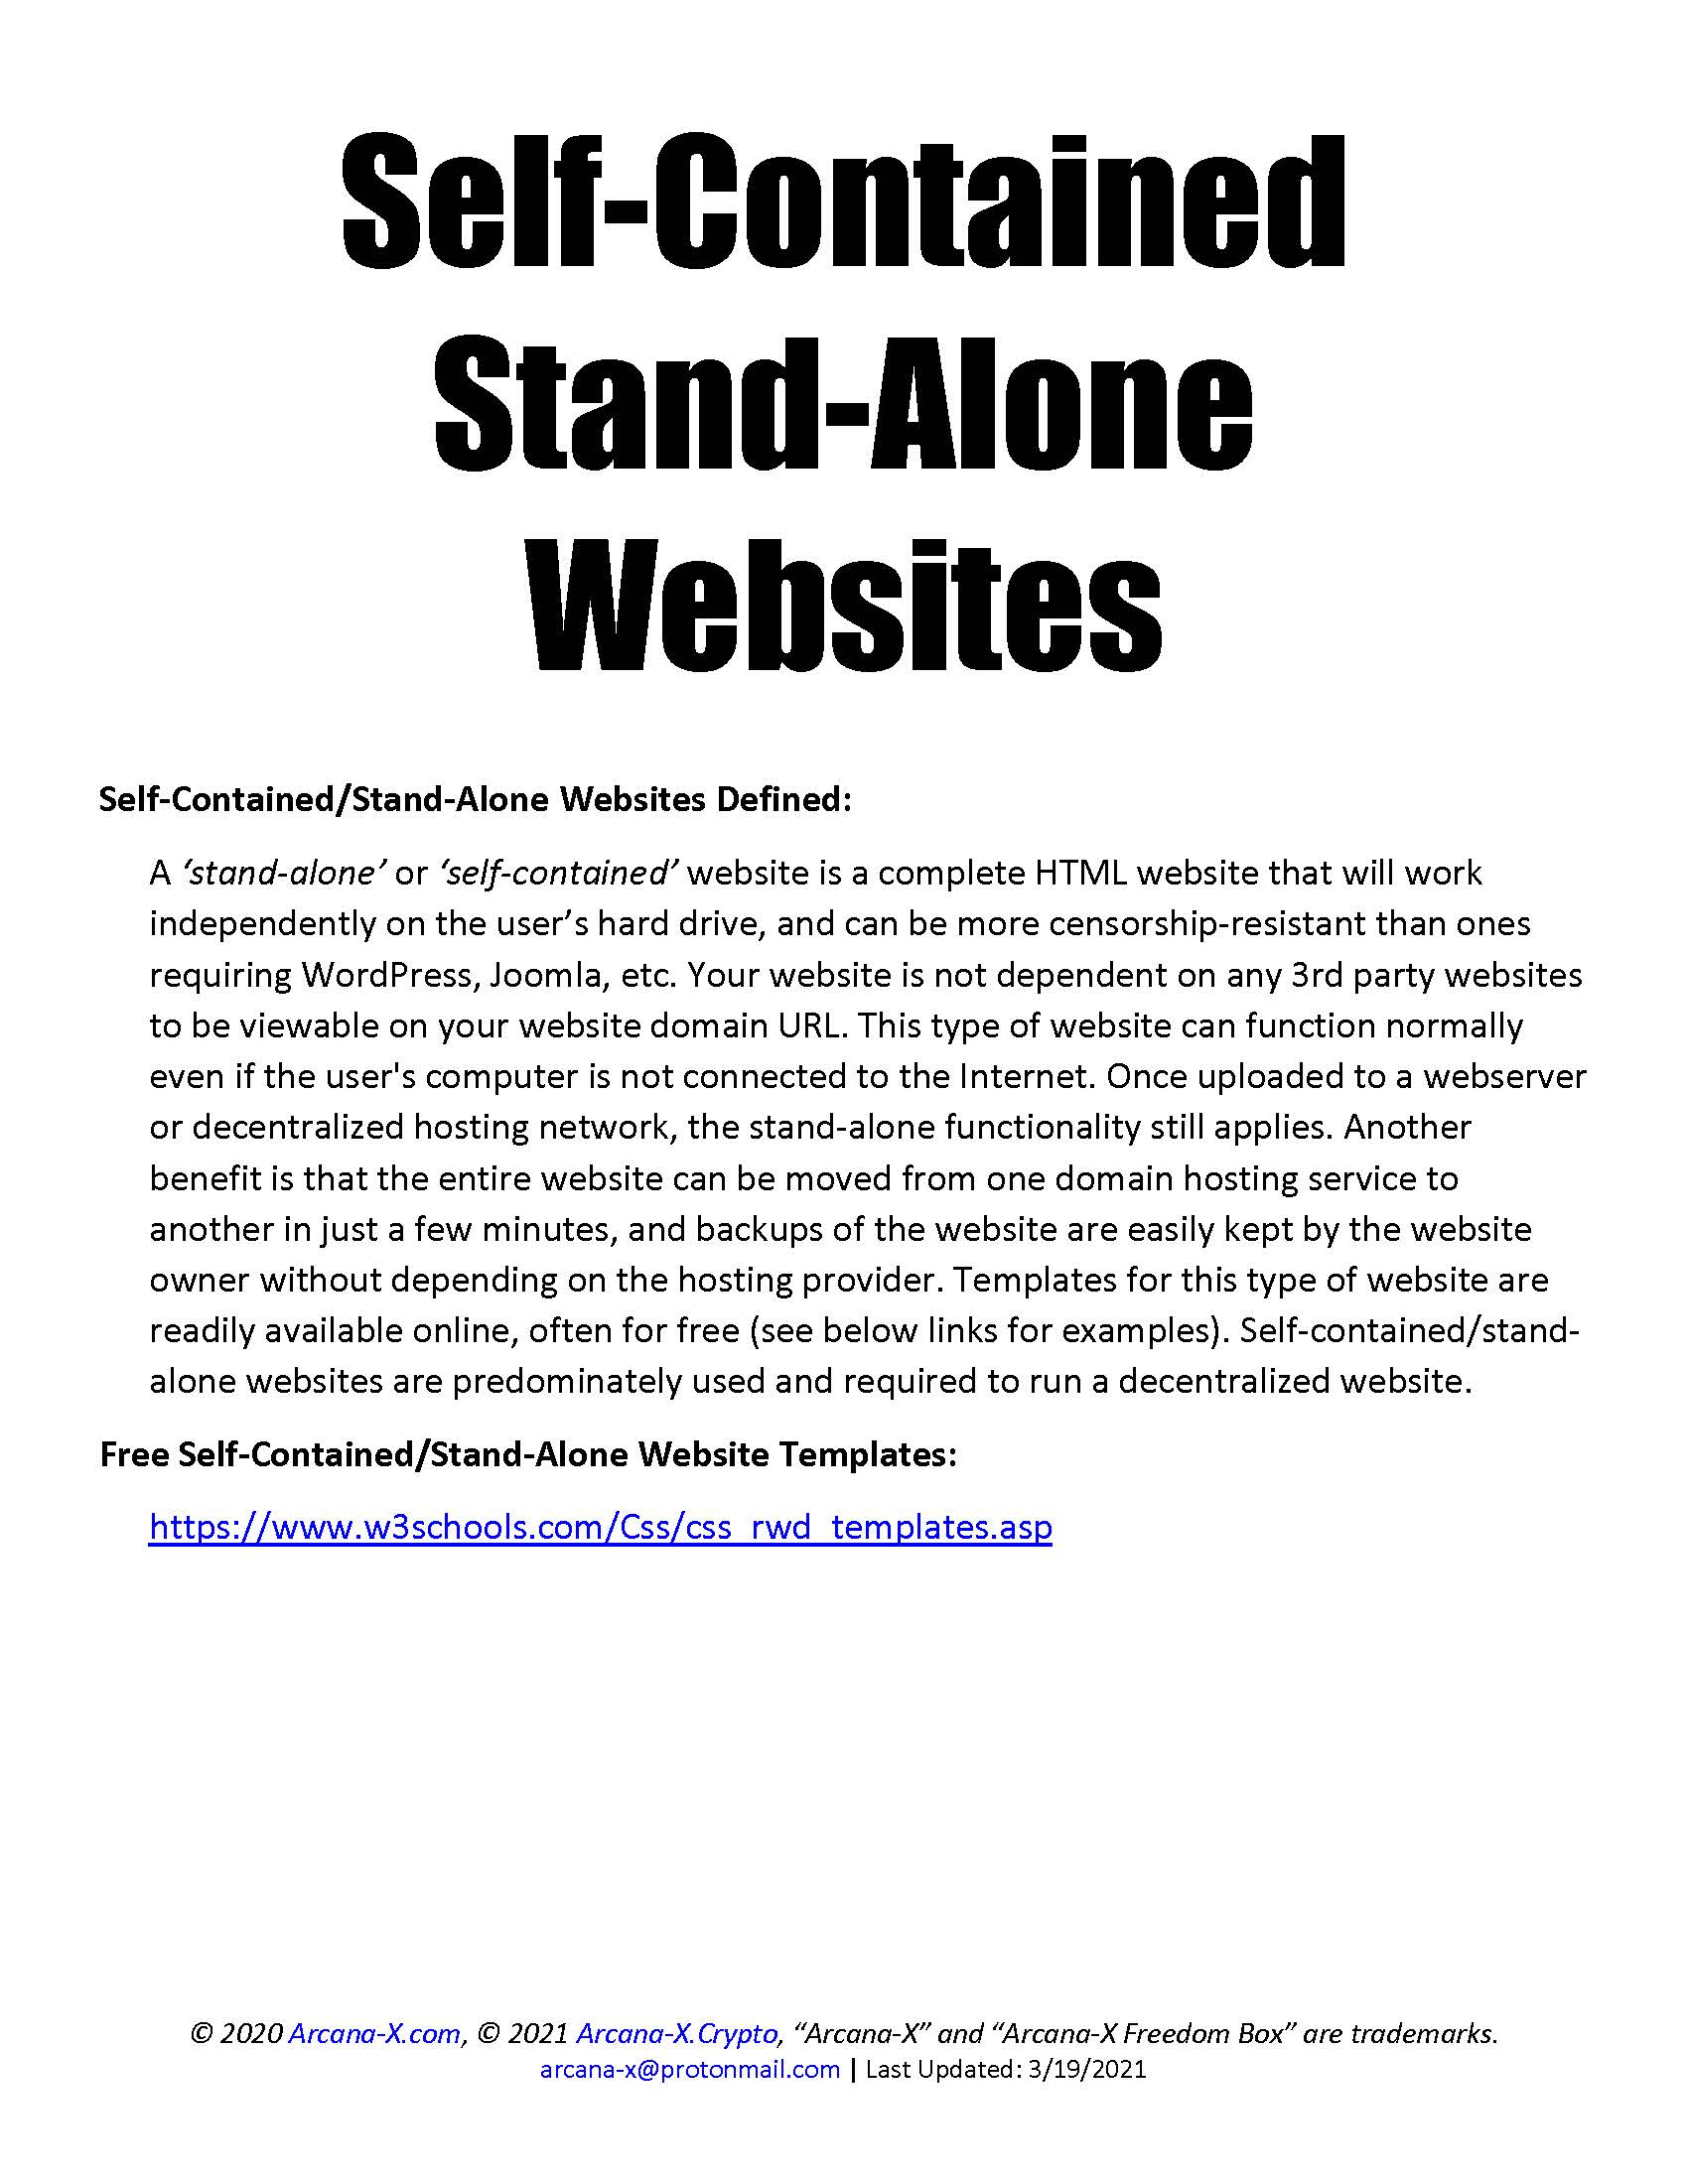 SELF-CONTAINED STAND-ALONE WEBSITES